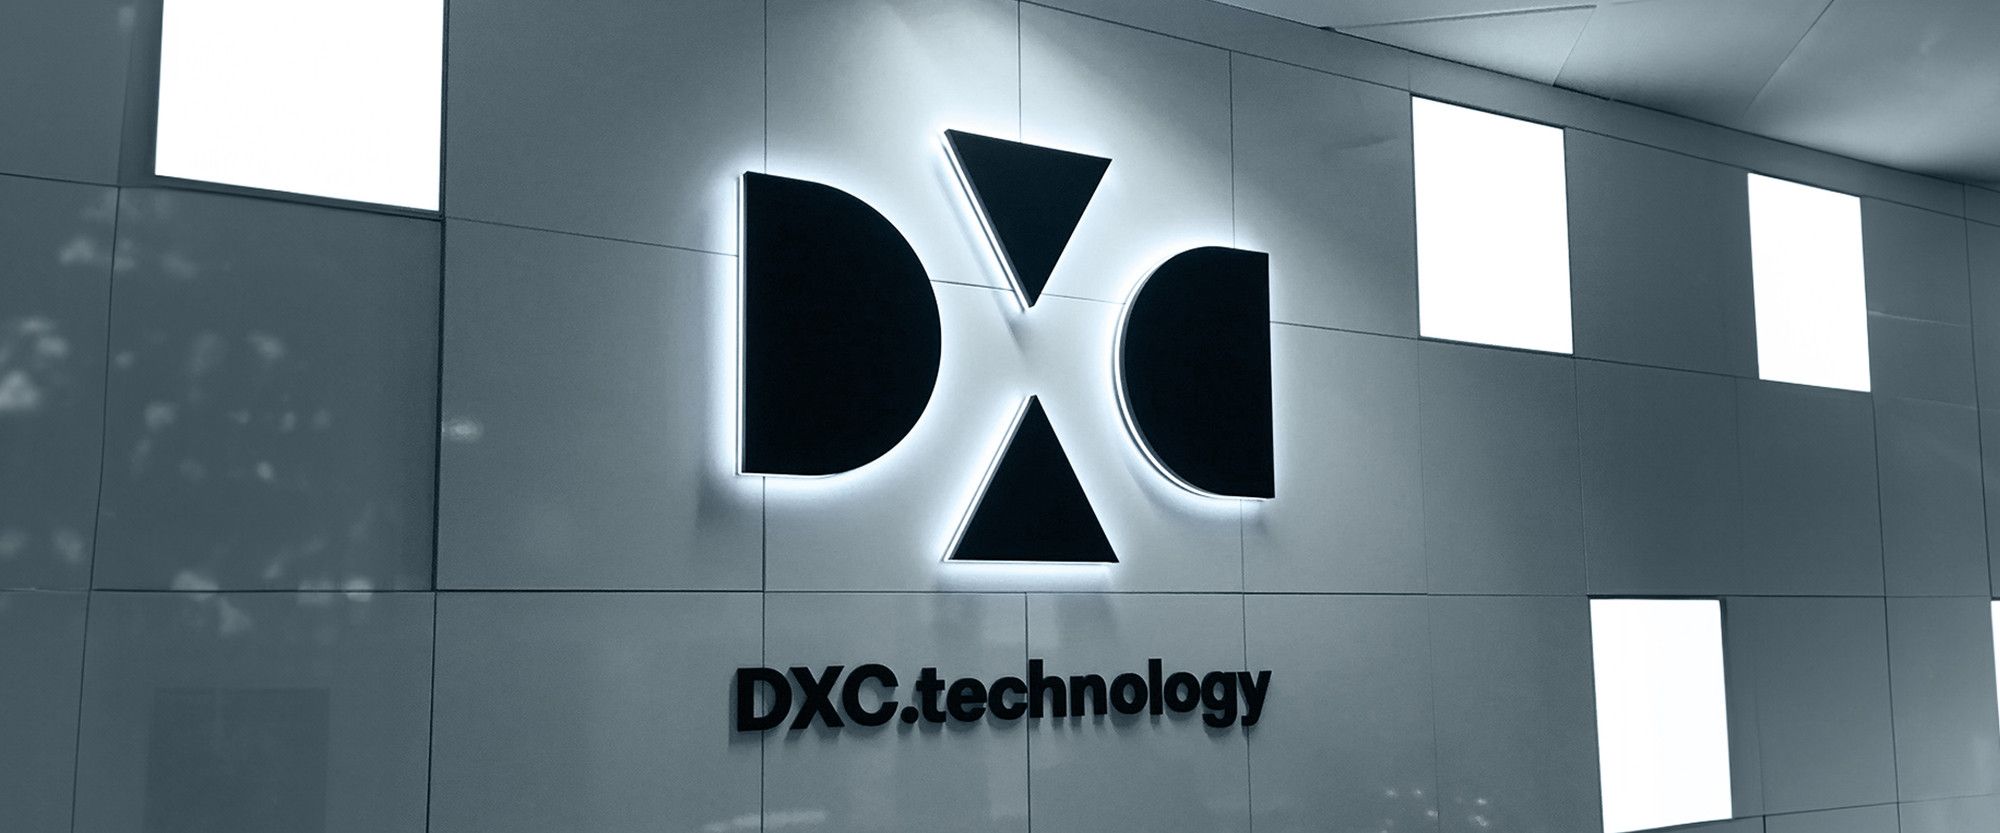 Reception area company sign installation for DXC Technology